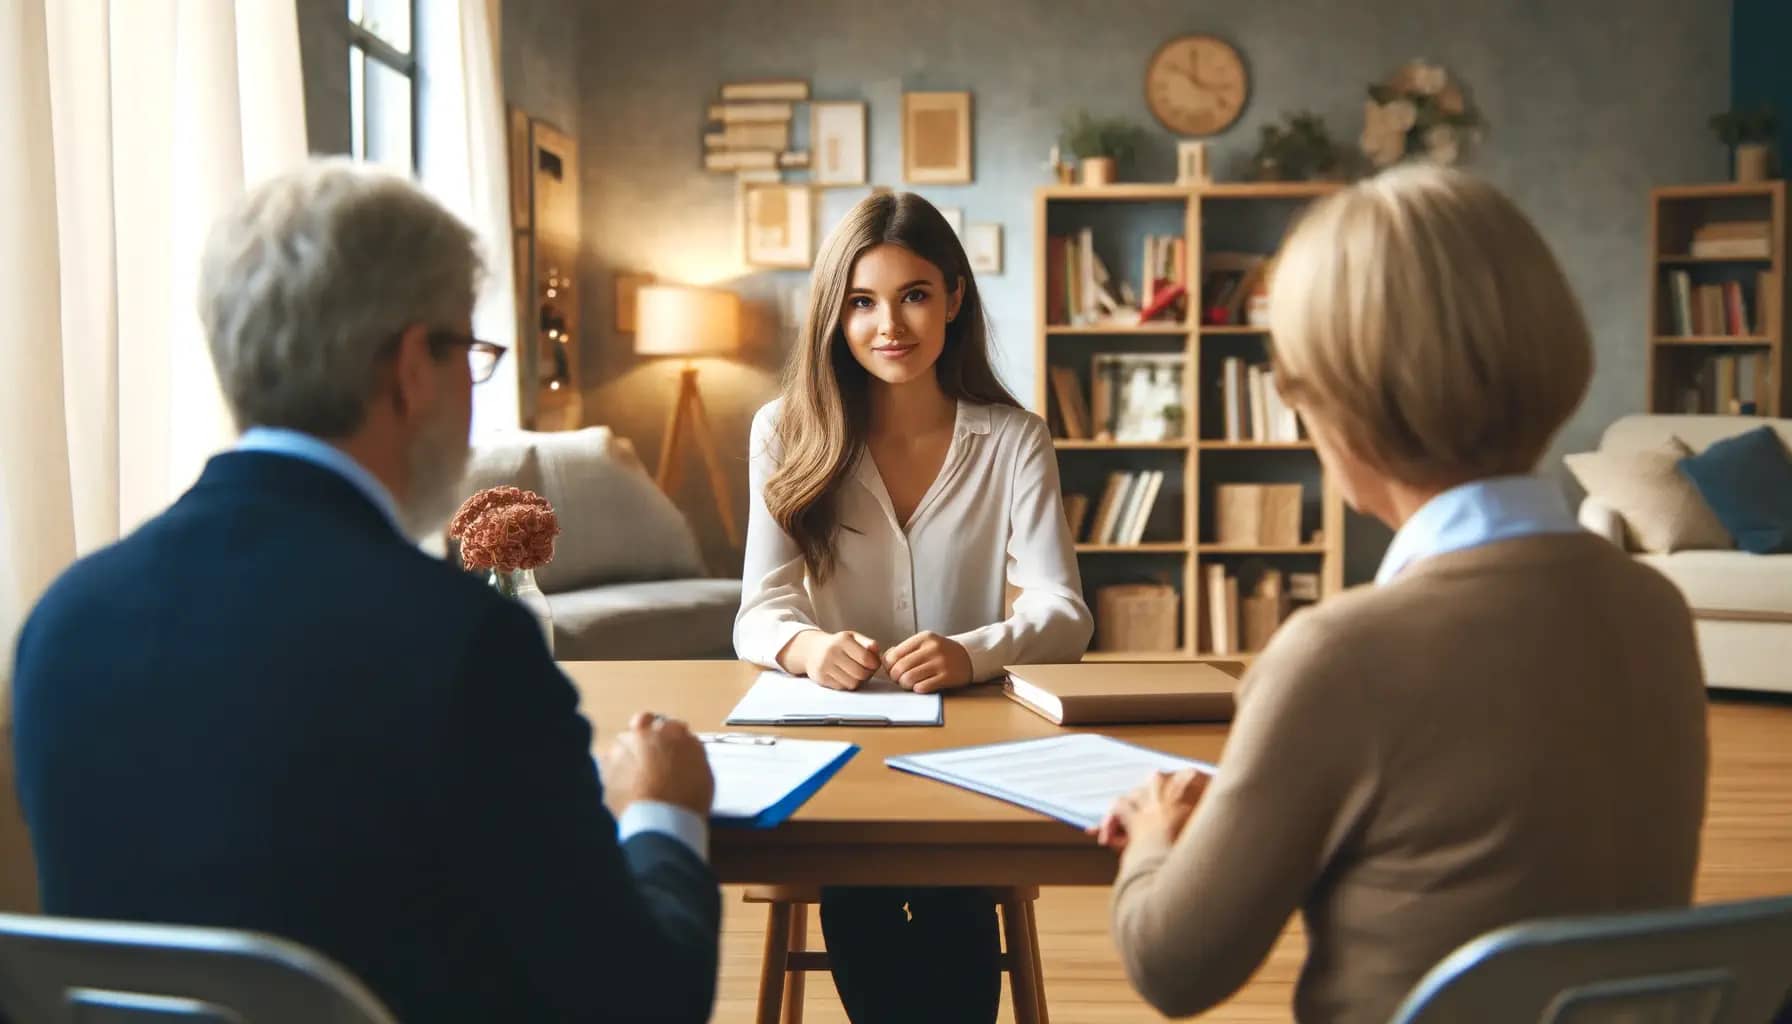 image of a female at a job interview with a man and a woman